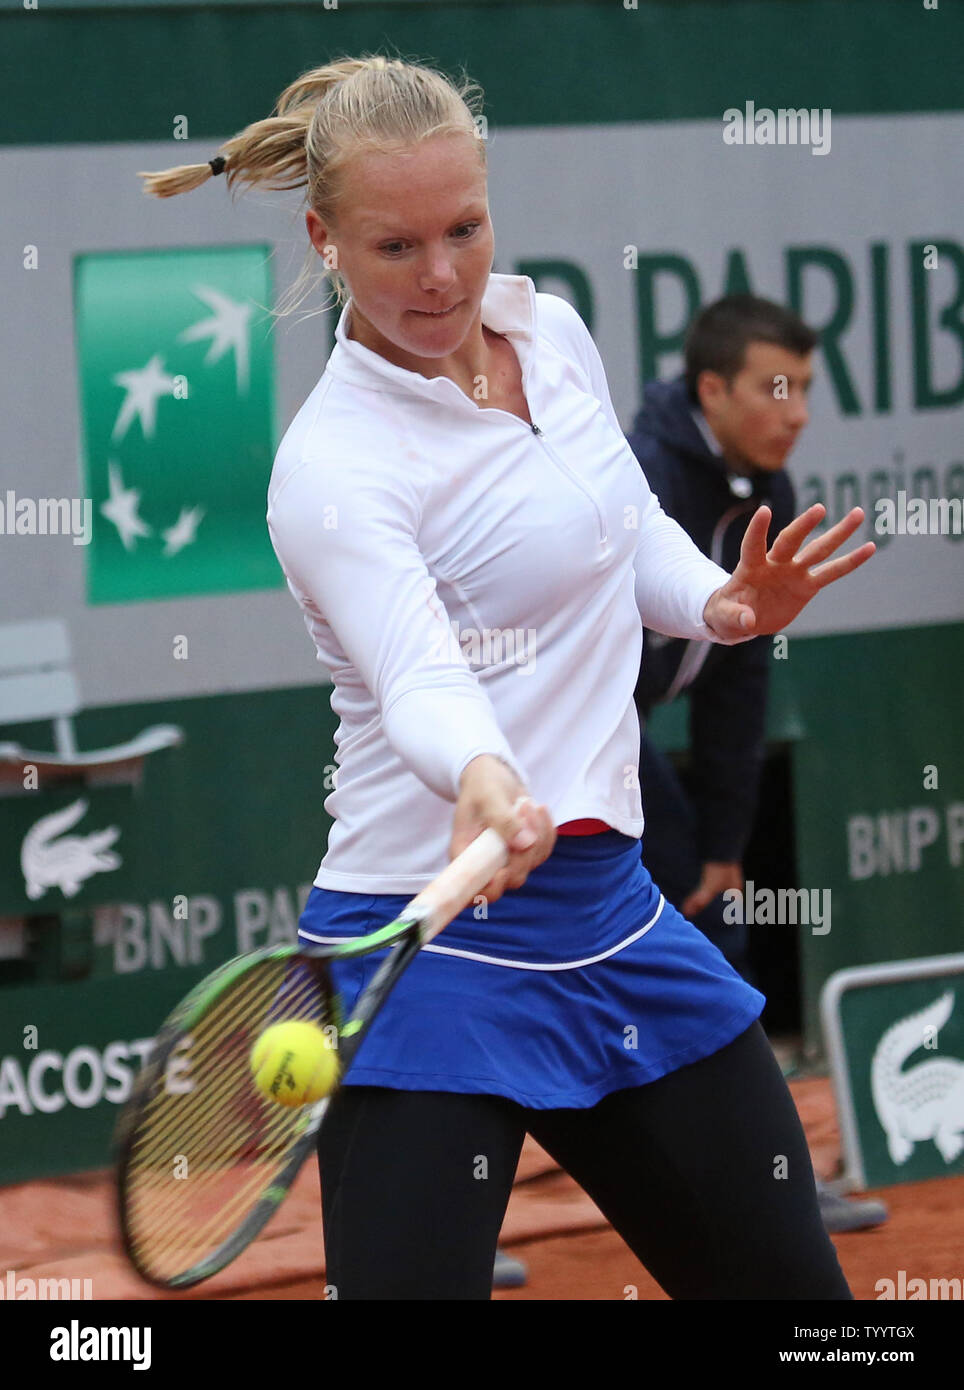 Kiki Bertens of the Netherlands hits a shot during her French Open women's  quarterfinal match against Timea Bacsinszky of Switzerland at Roland Garros  in Paris on June 2, 2016. Bertens defeated Bacsinszky